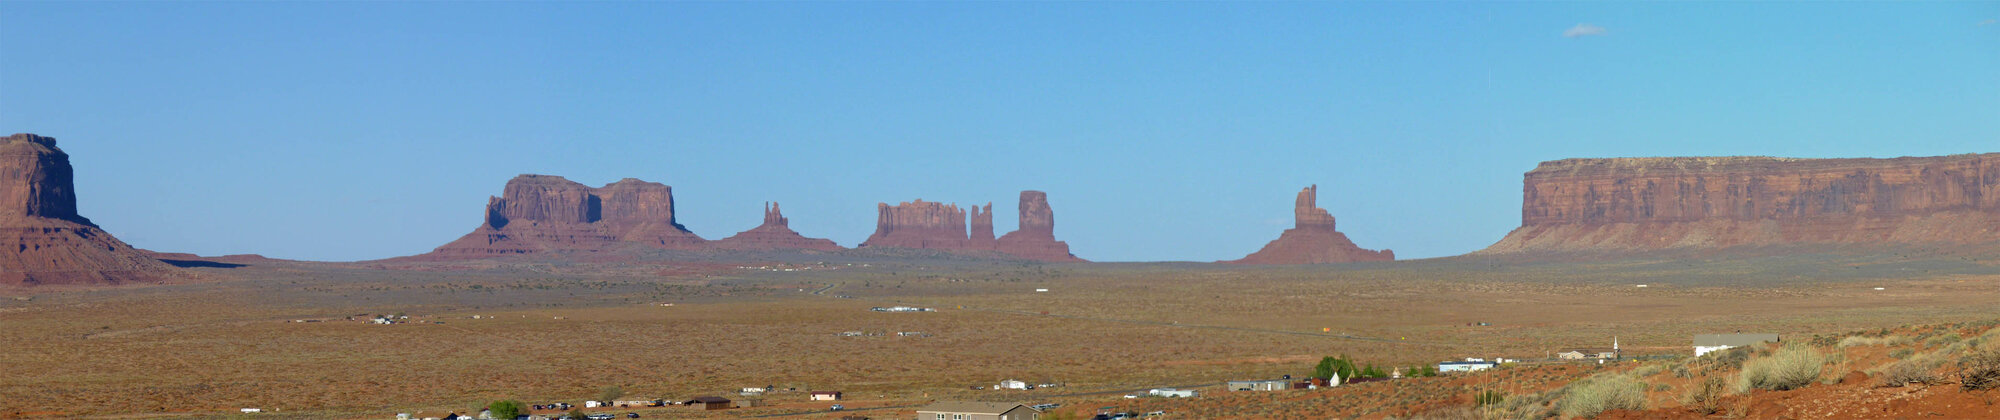 Monument Valley Panorama2019-21sf 4-21-18.jpg